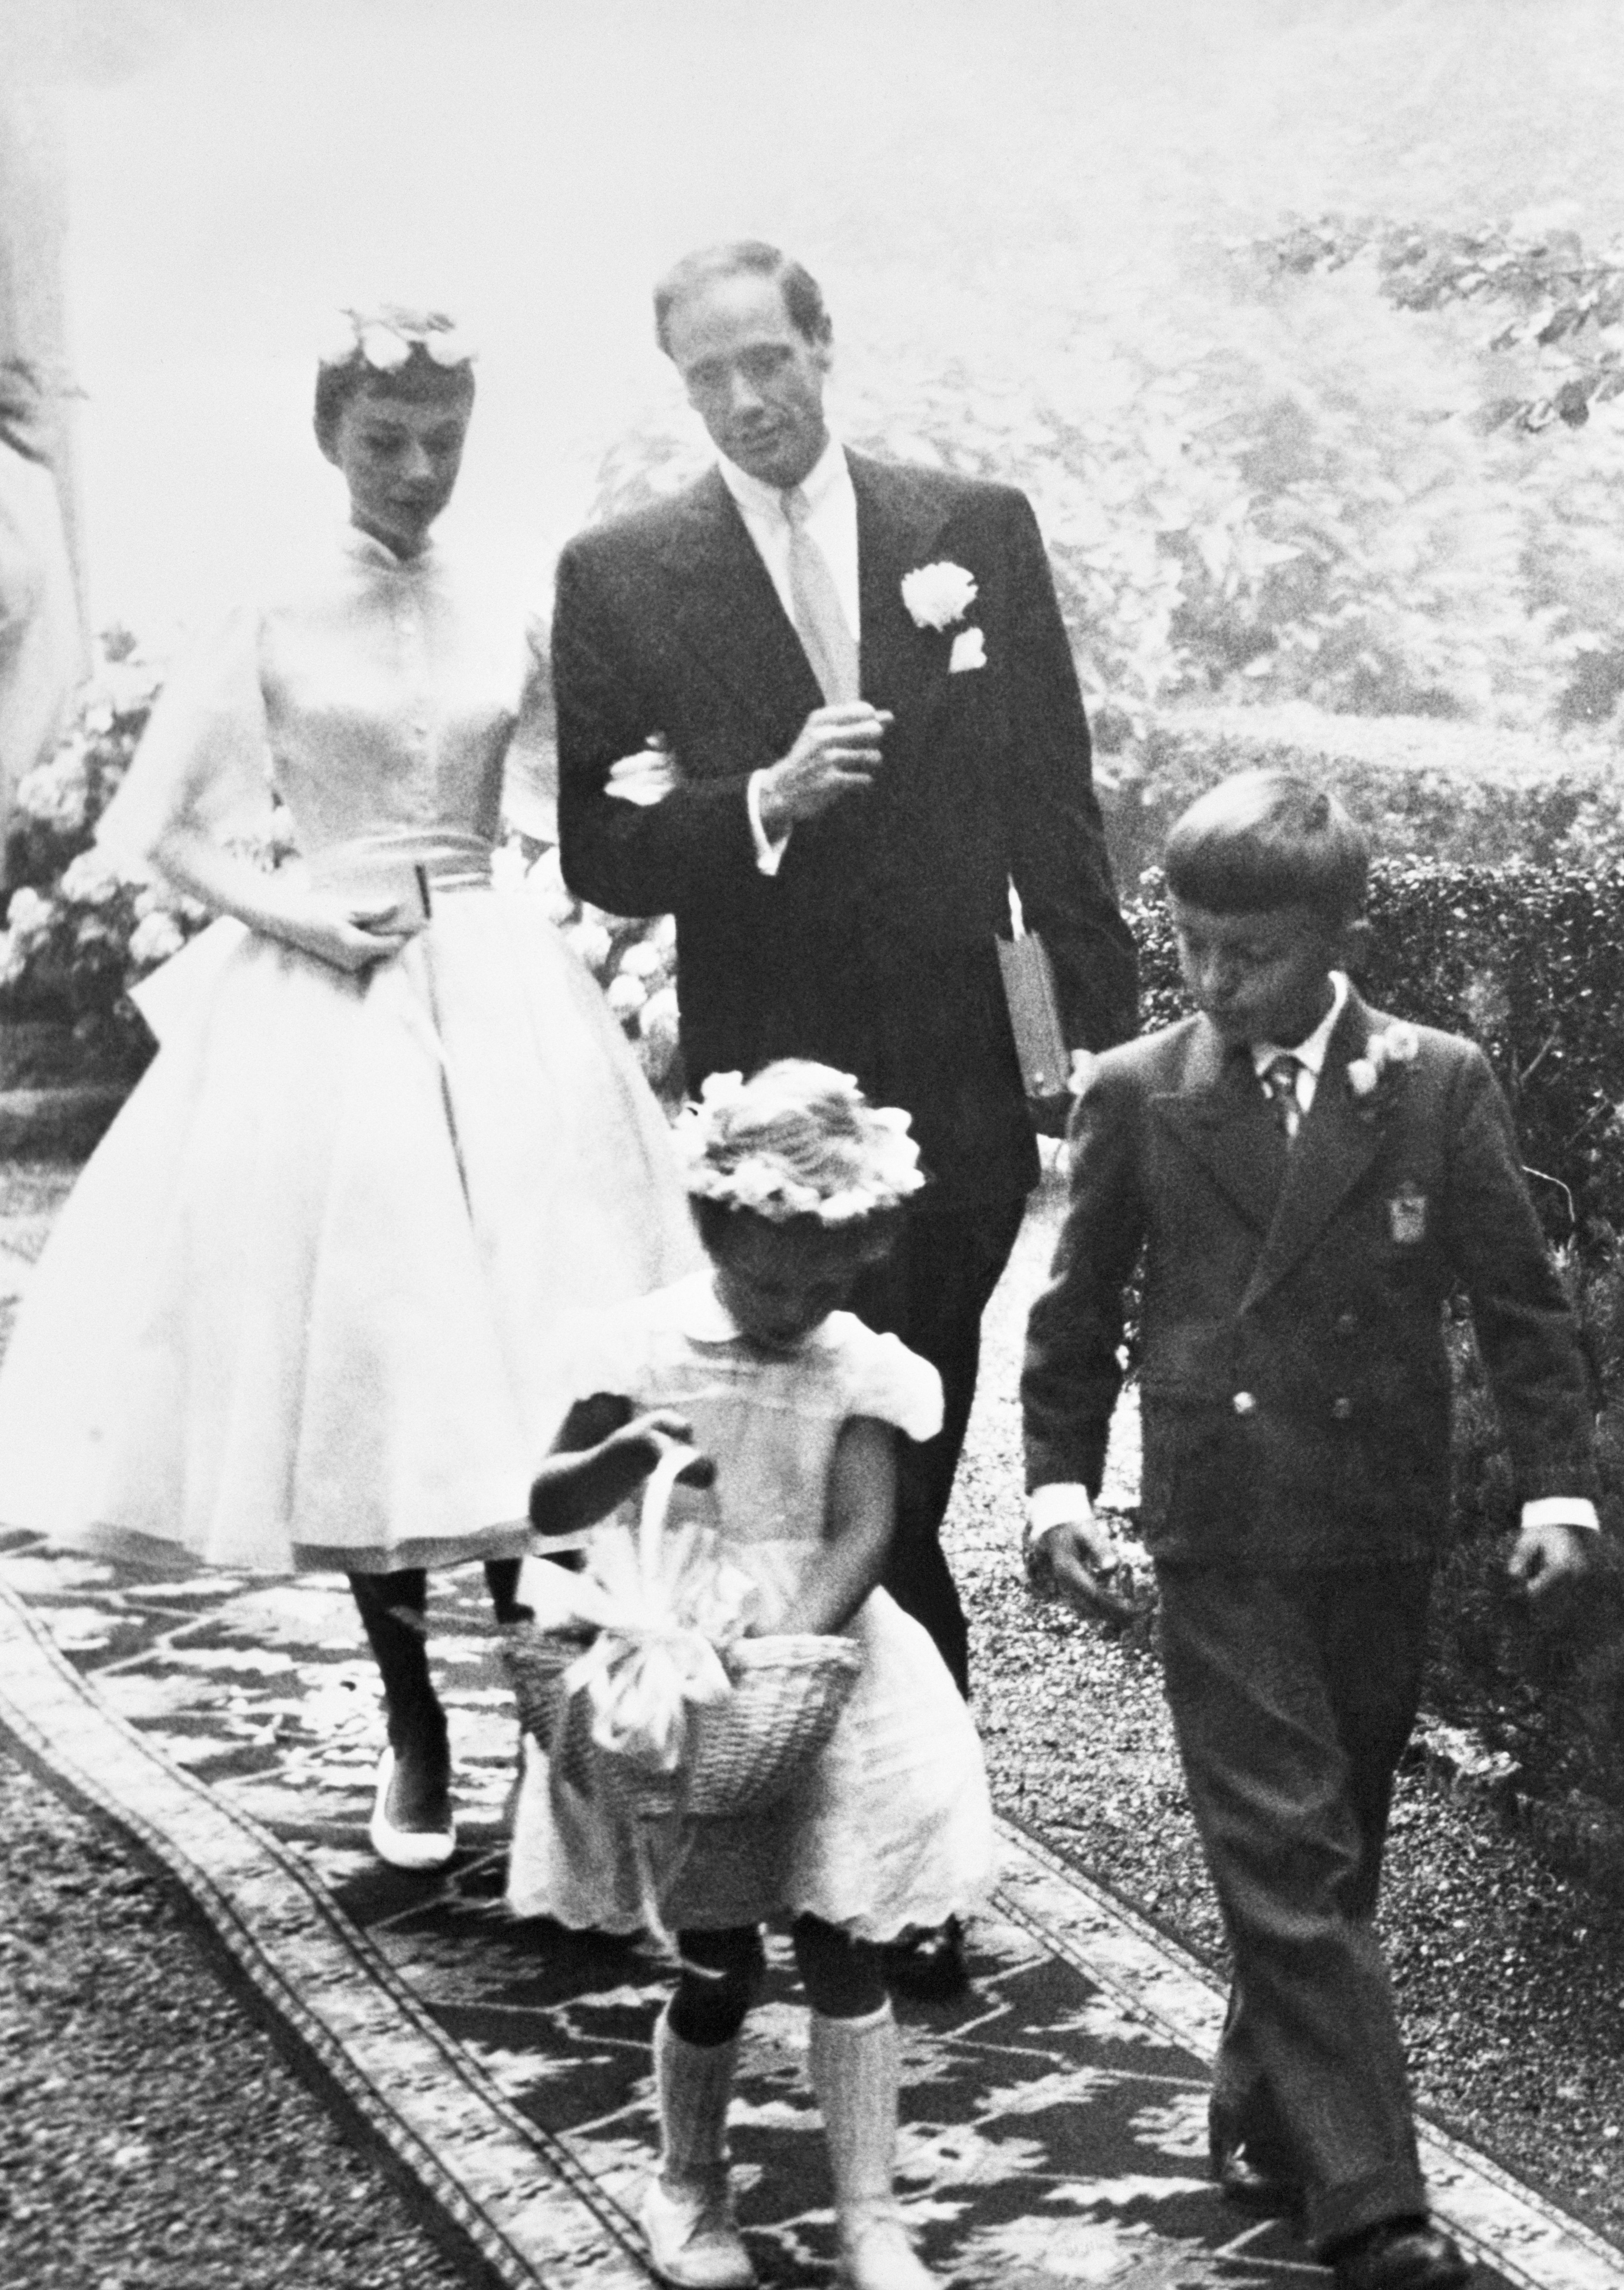 Audrey Hepburn, 25, and Mel Ferrer, 37, leave the chapel after their wedding at Burgenstock Mountain | Source: Getty Images